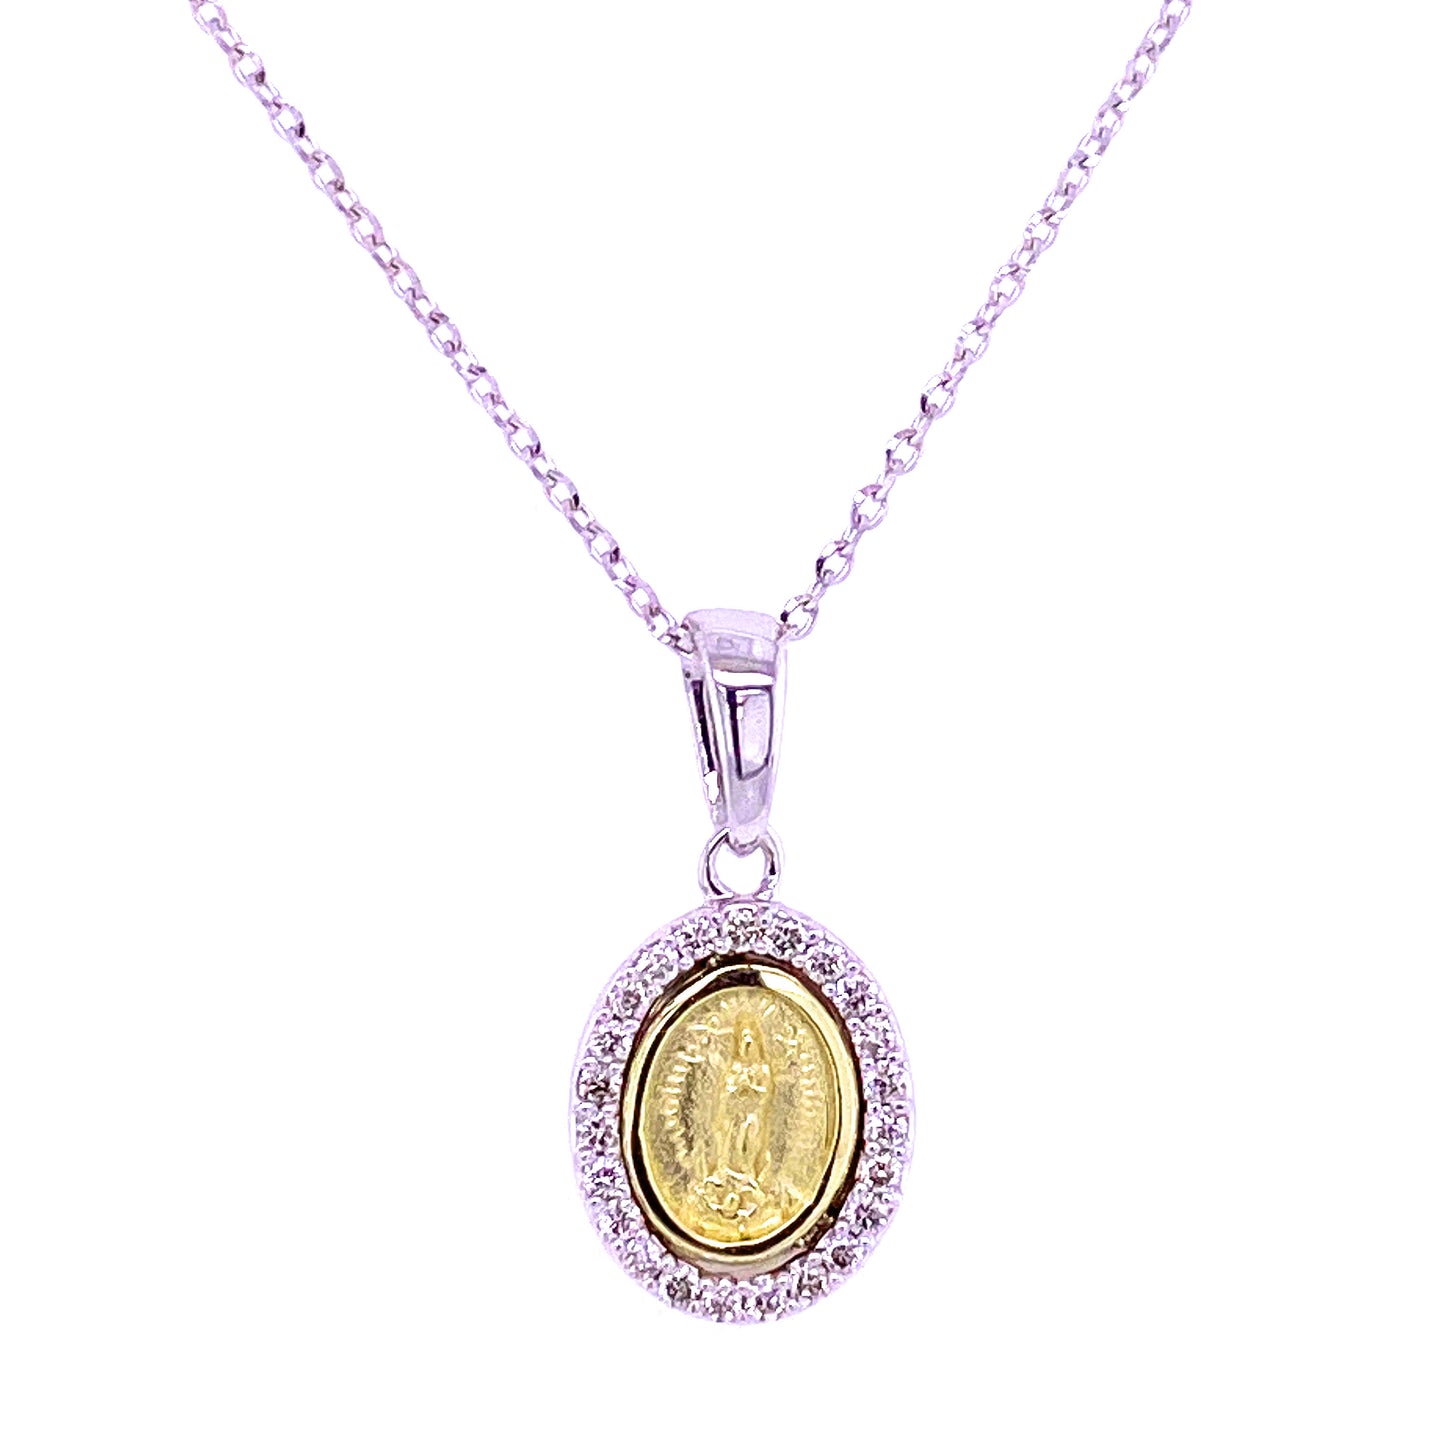 Miniature Genuine Diamond Guadalupe/Miraculous Medal in 14K Gold